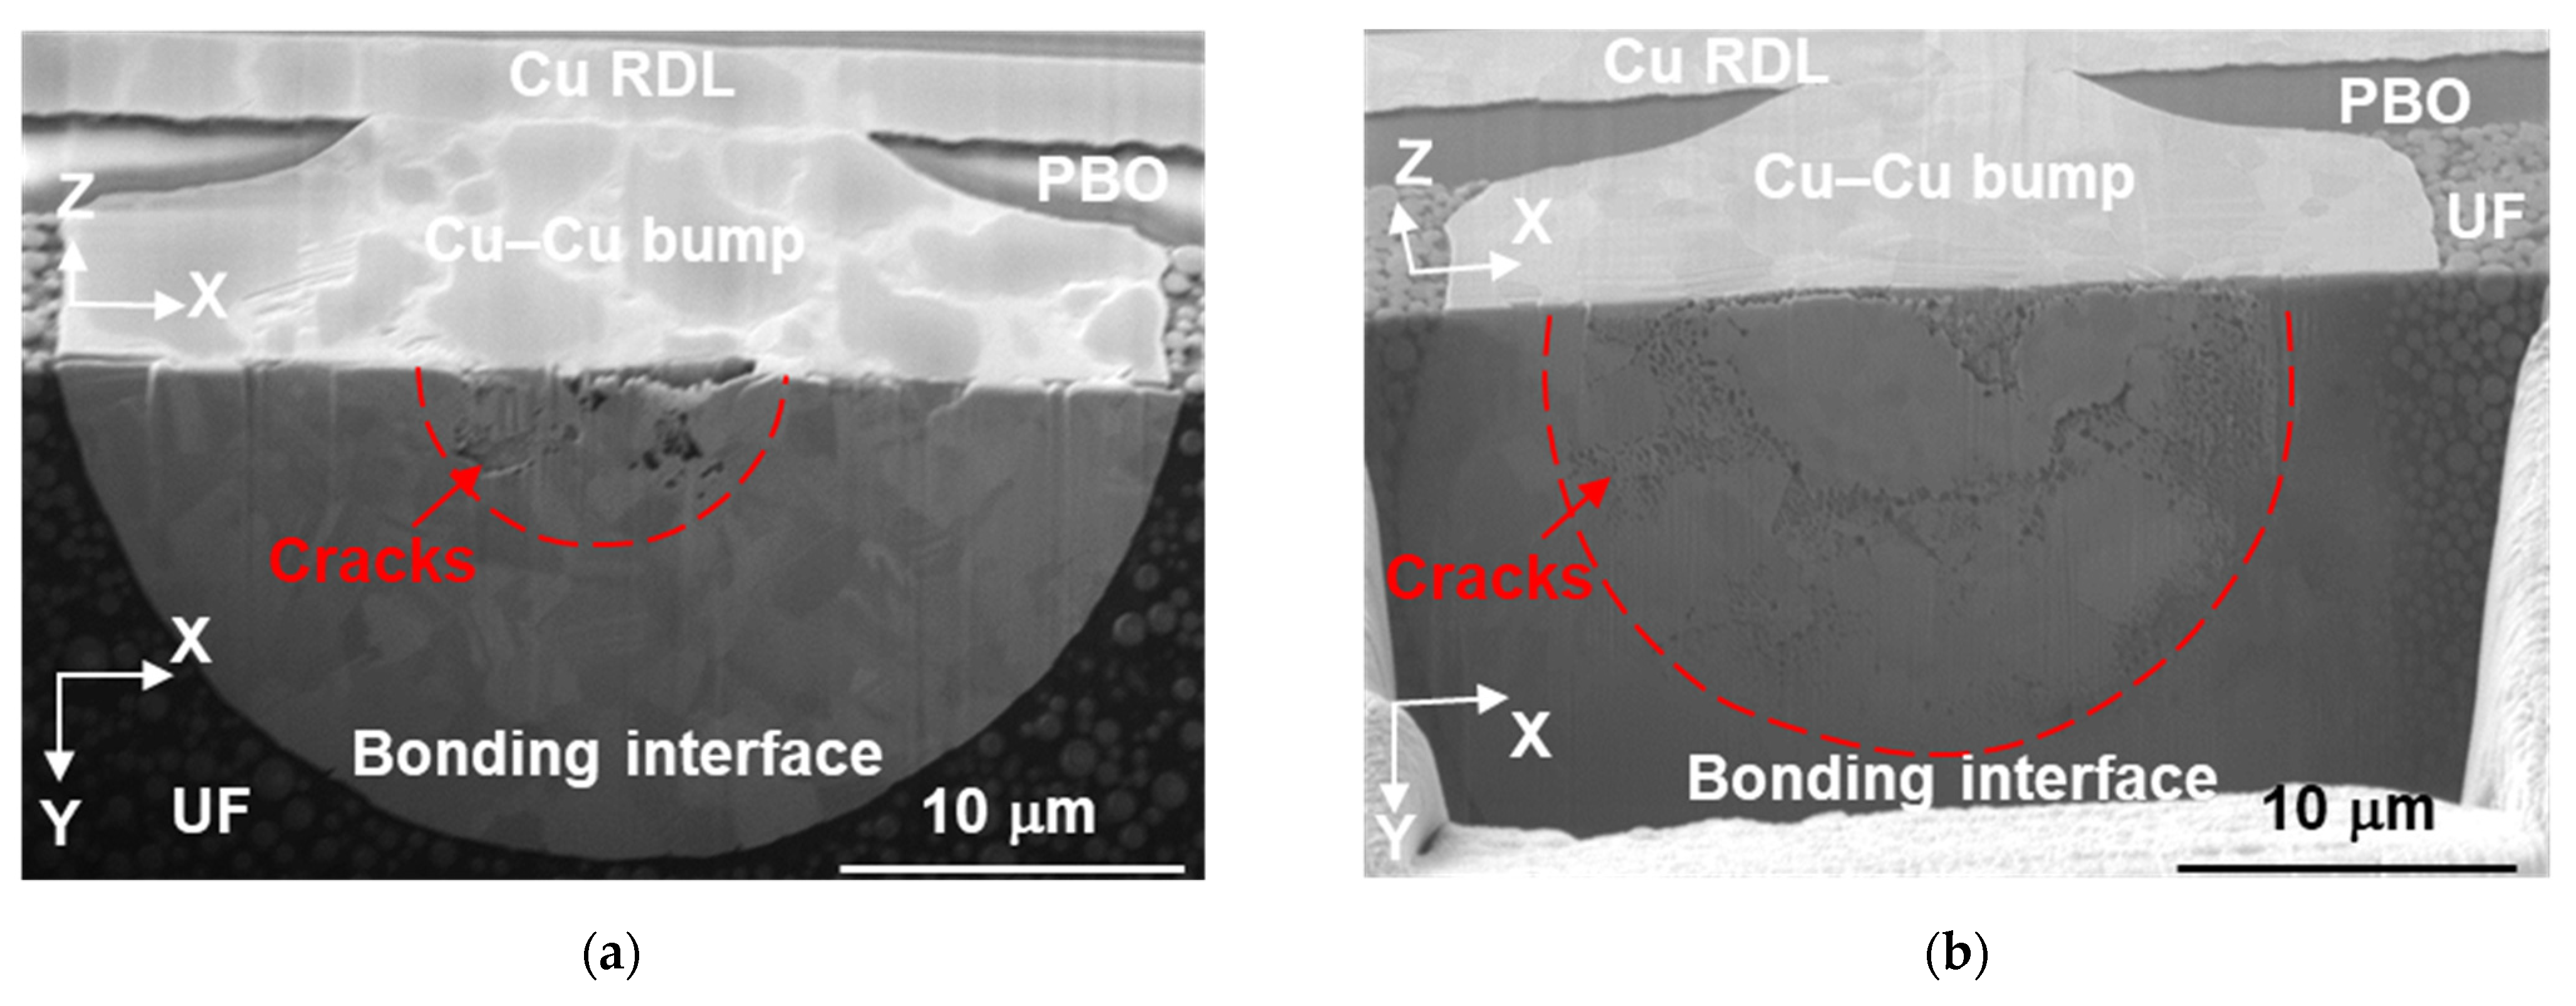 The bond pad redistribution layer (polyimide 1) and the under bump